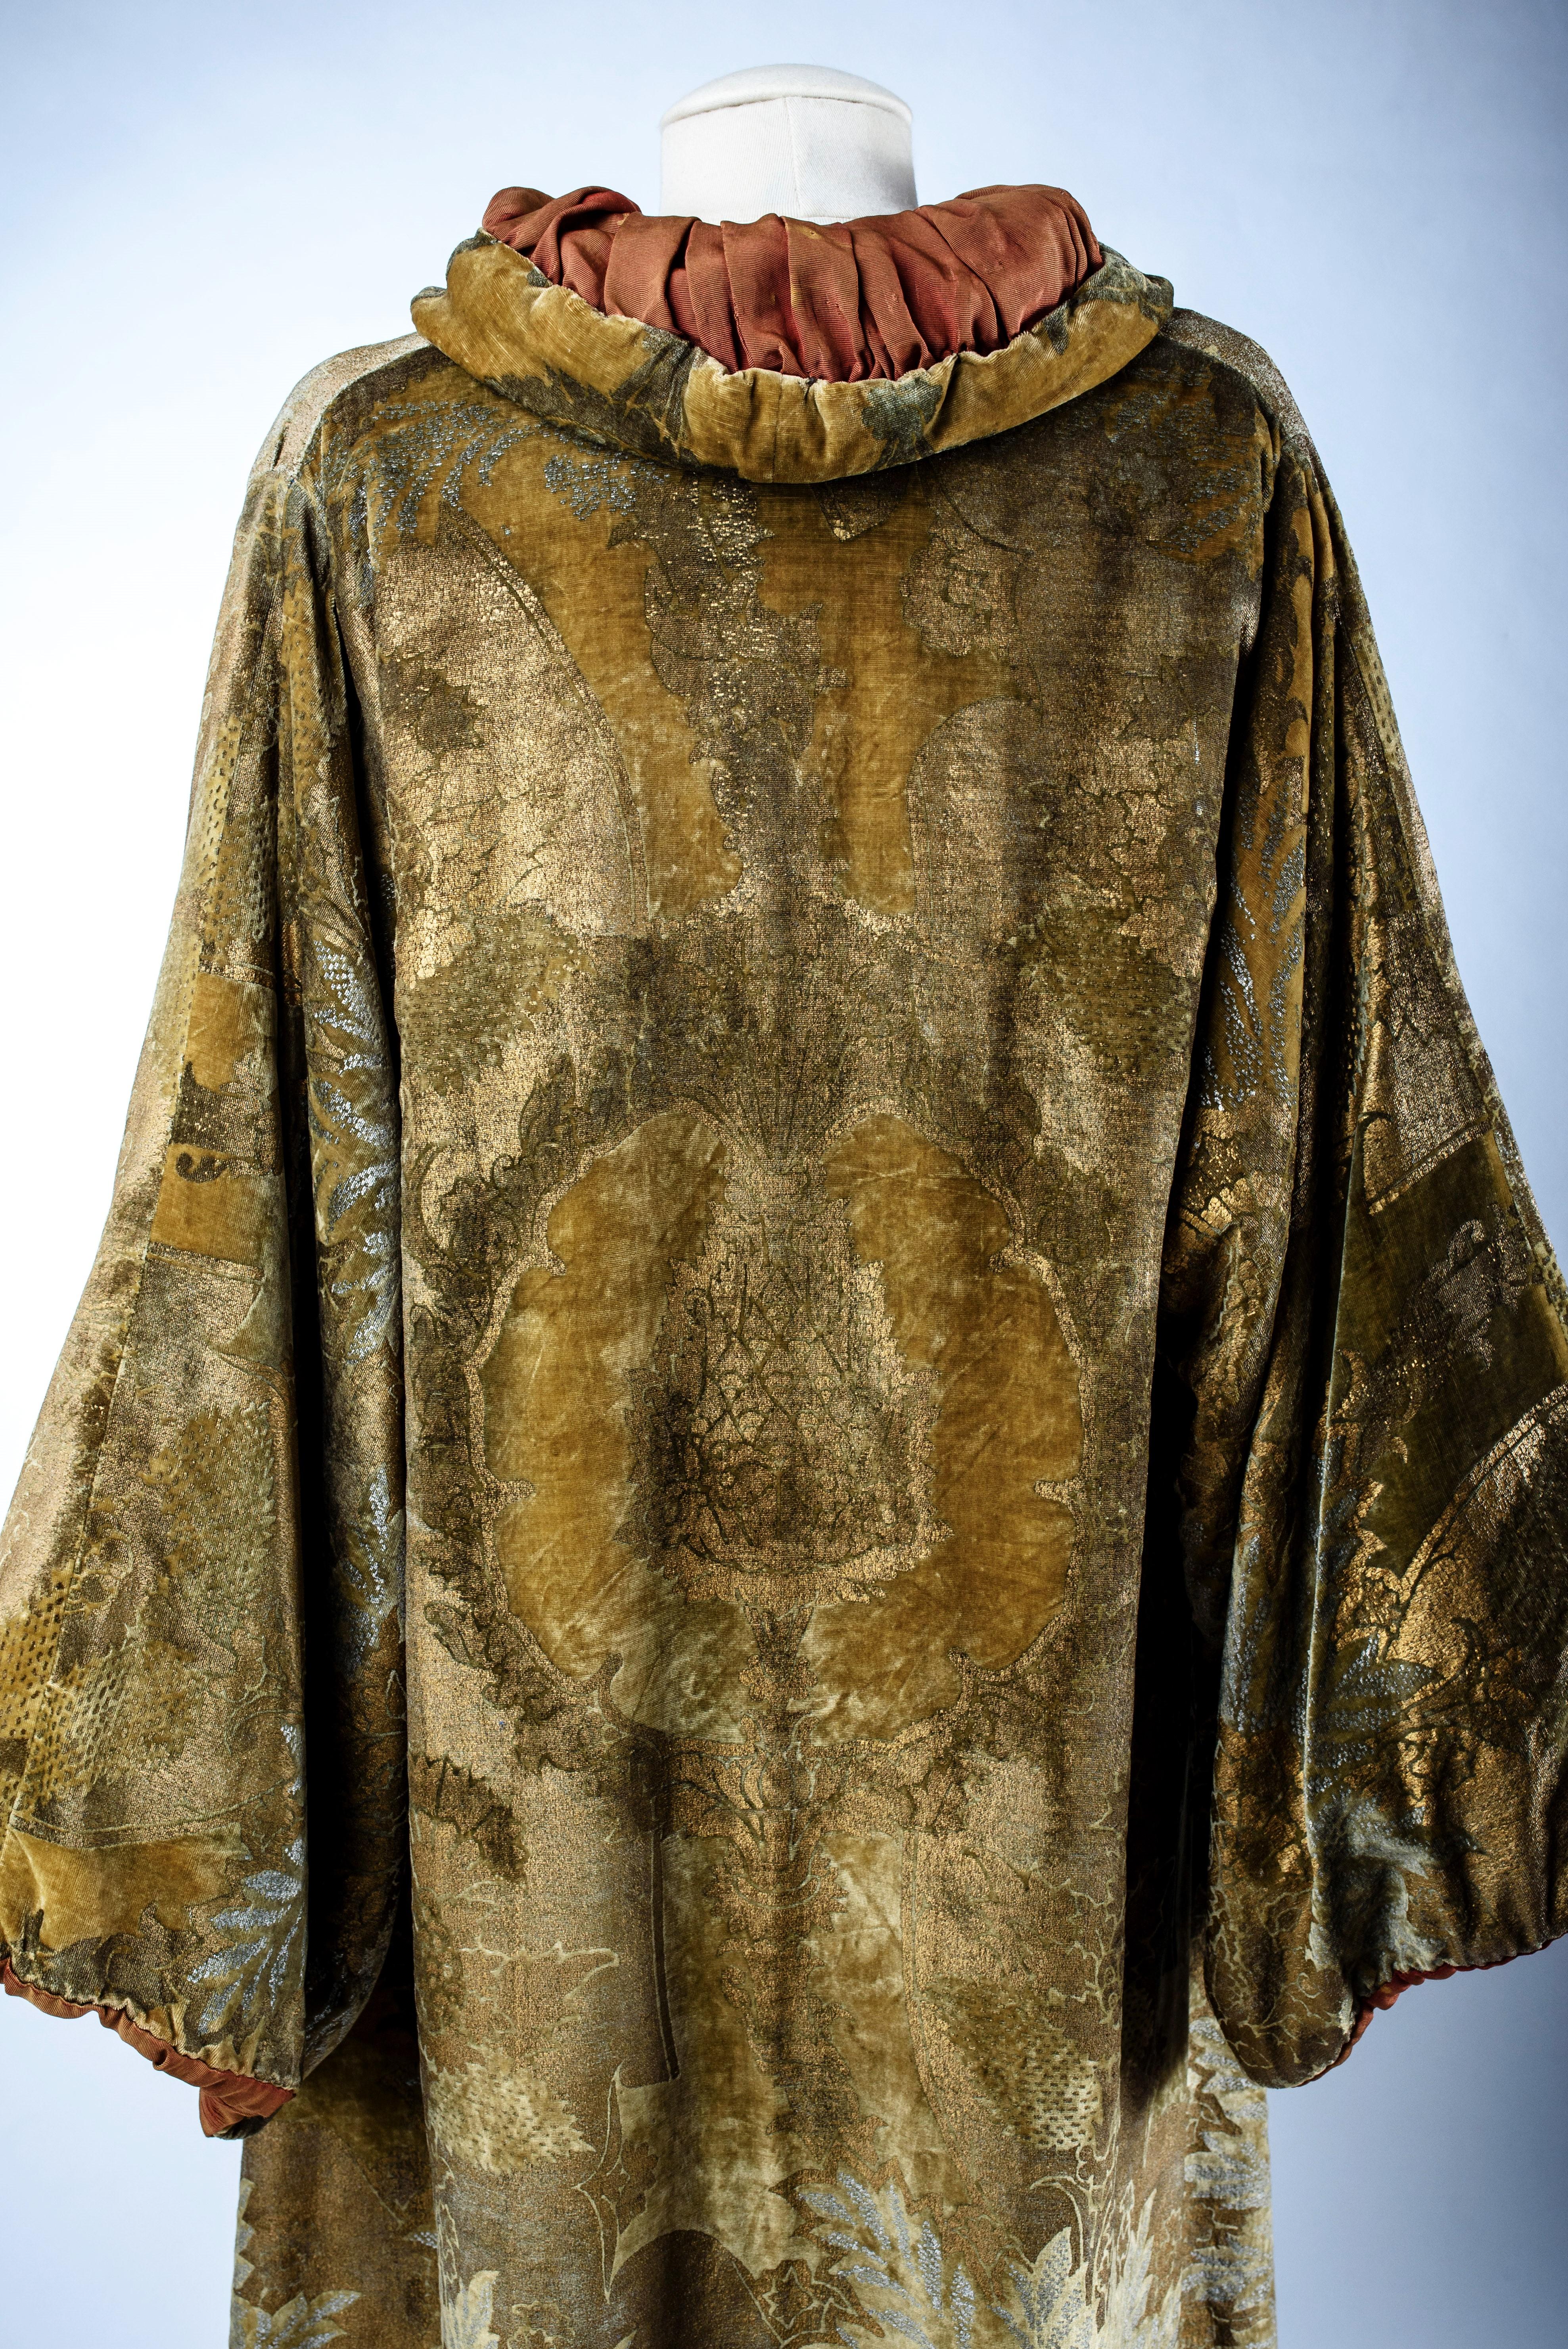 A Mariano Fortuny Gold and Silver Printed Velvet Evening Coat -Venice Circa 1925 7